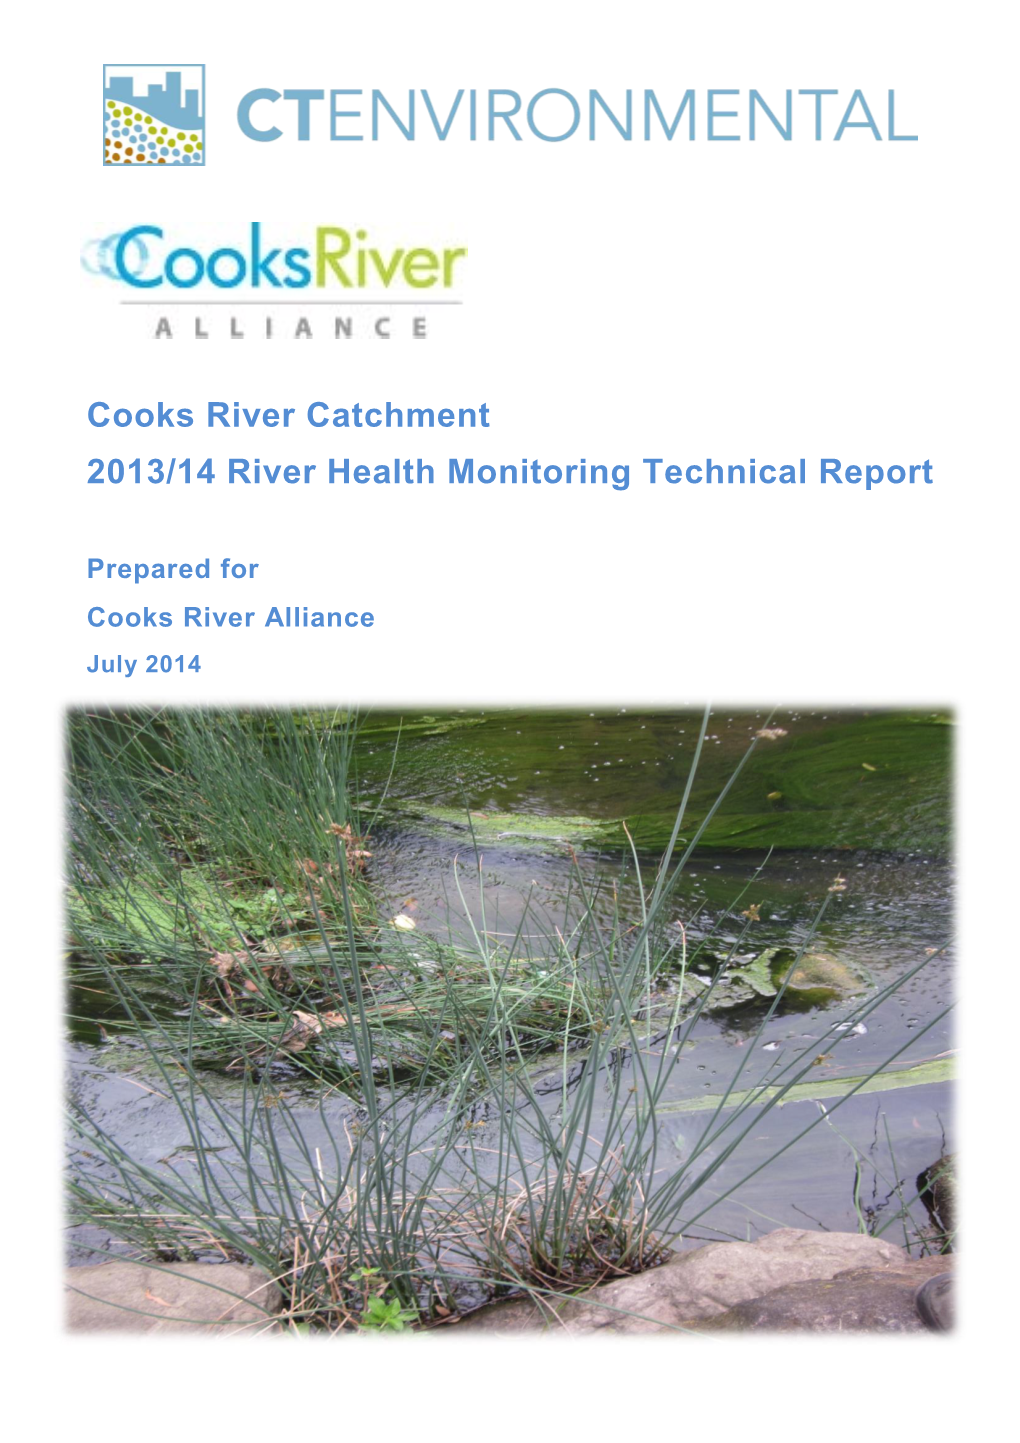 Cooks River Catchment 2013/14 River Health Monitoring Technical Report